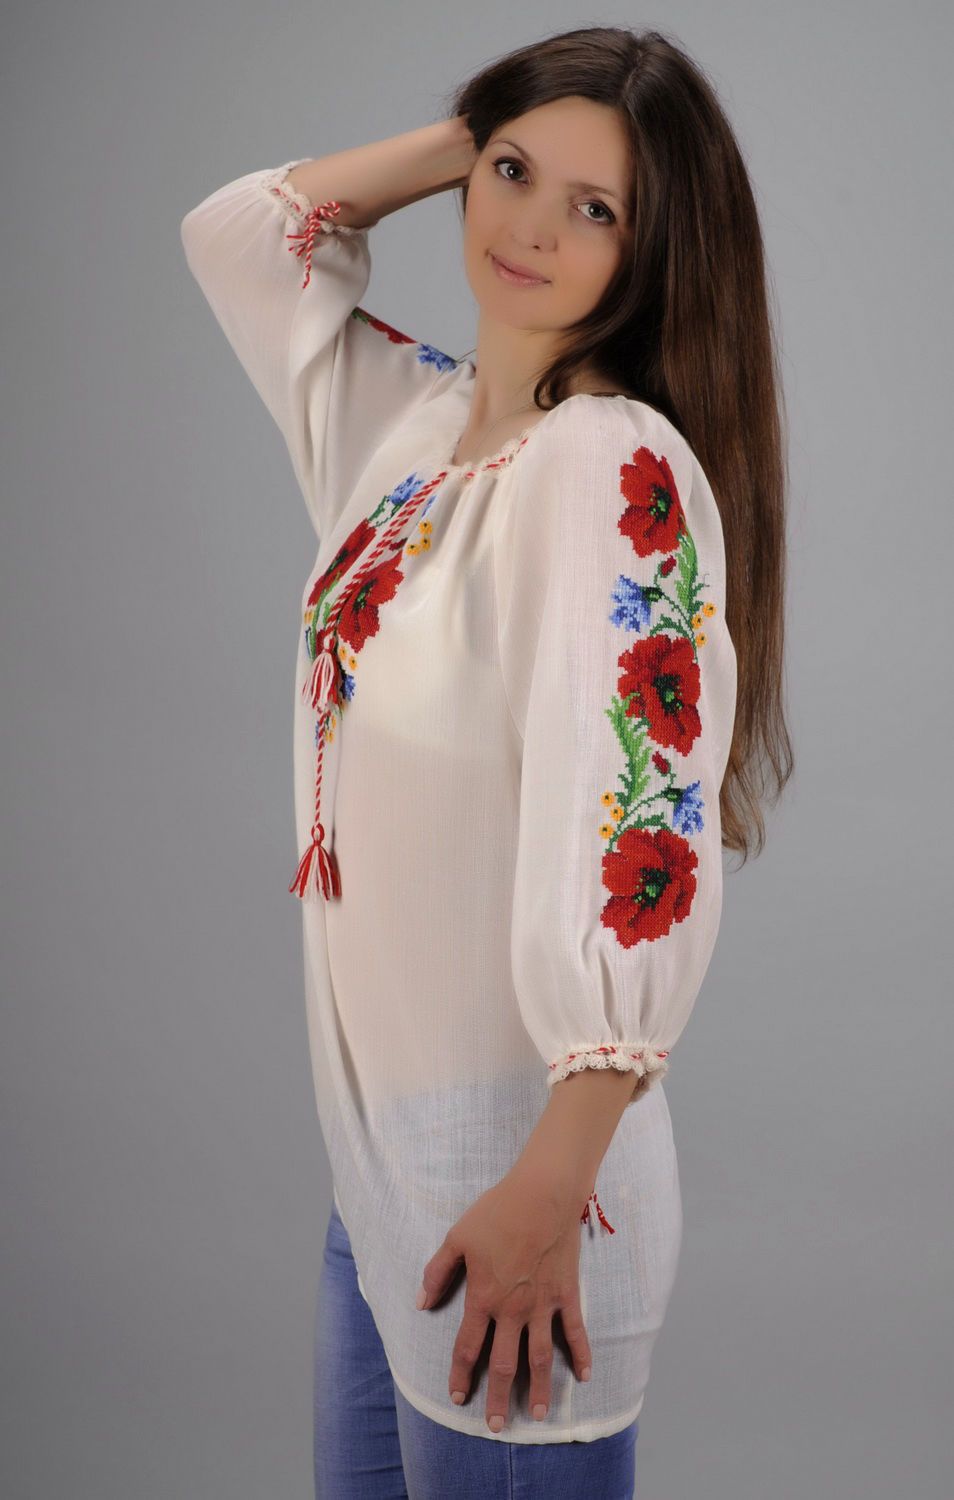 Embroidered shirt photo 5